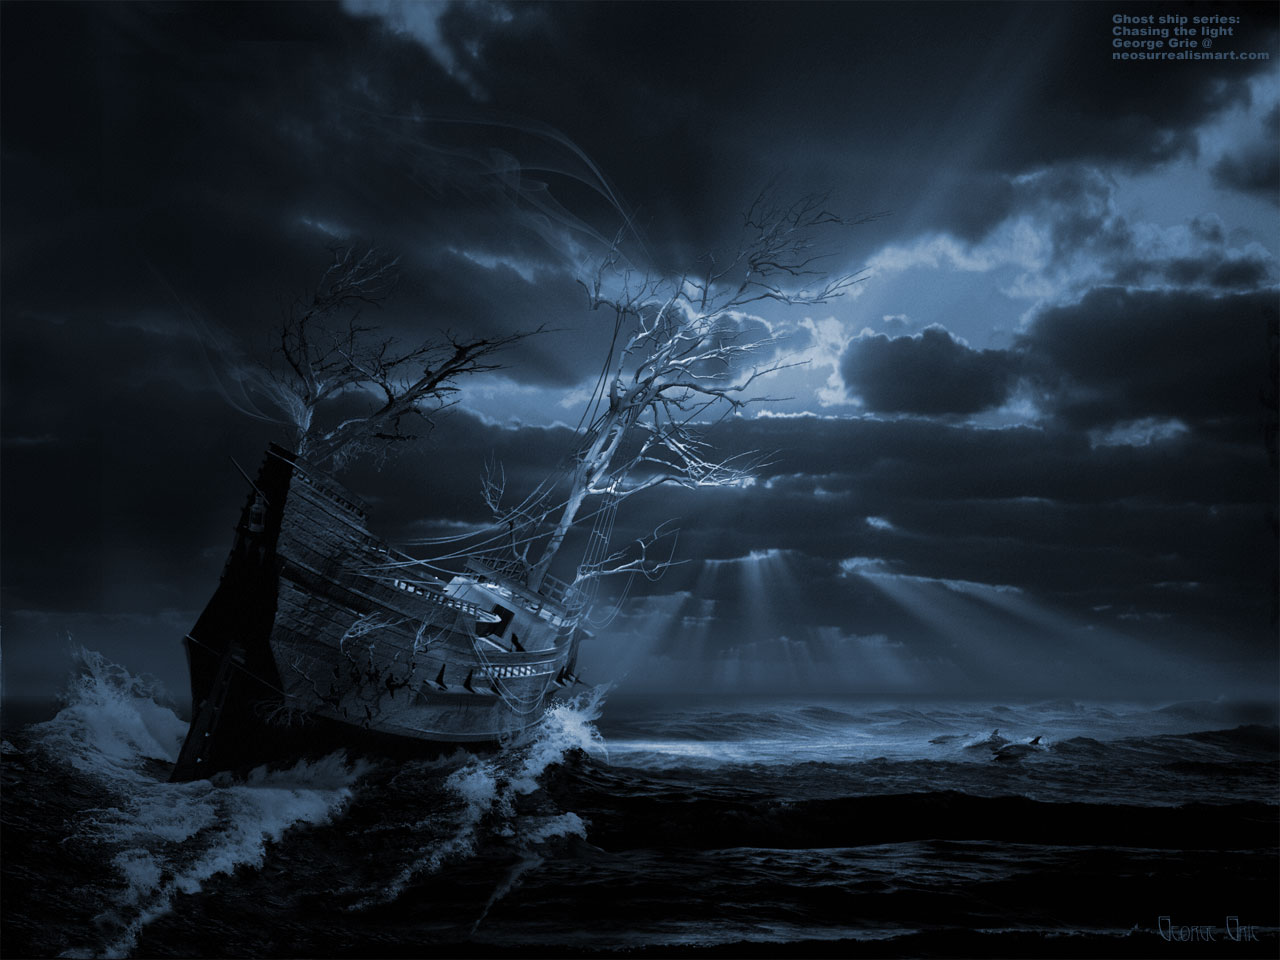 Prints and desktop backgrounds by 3D artist George Grie Ghost ship